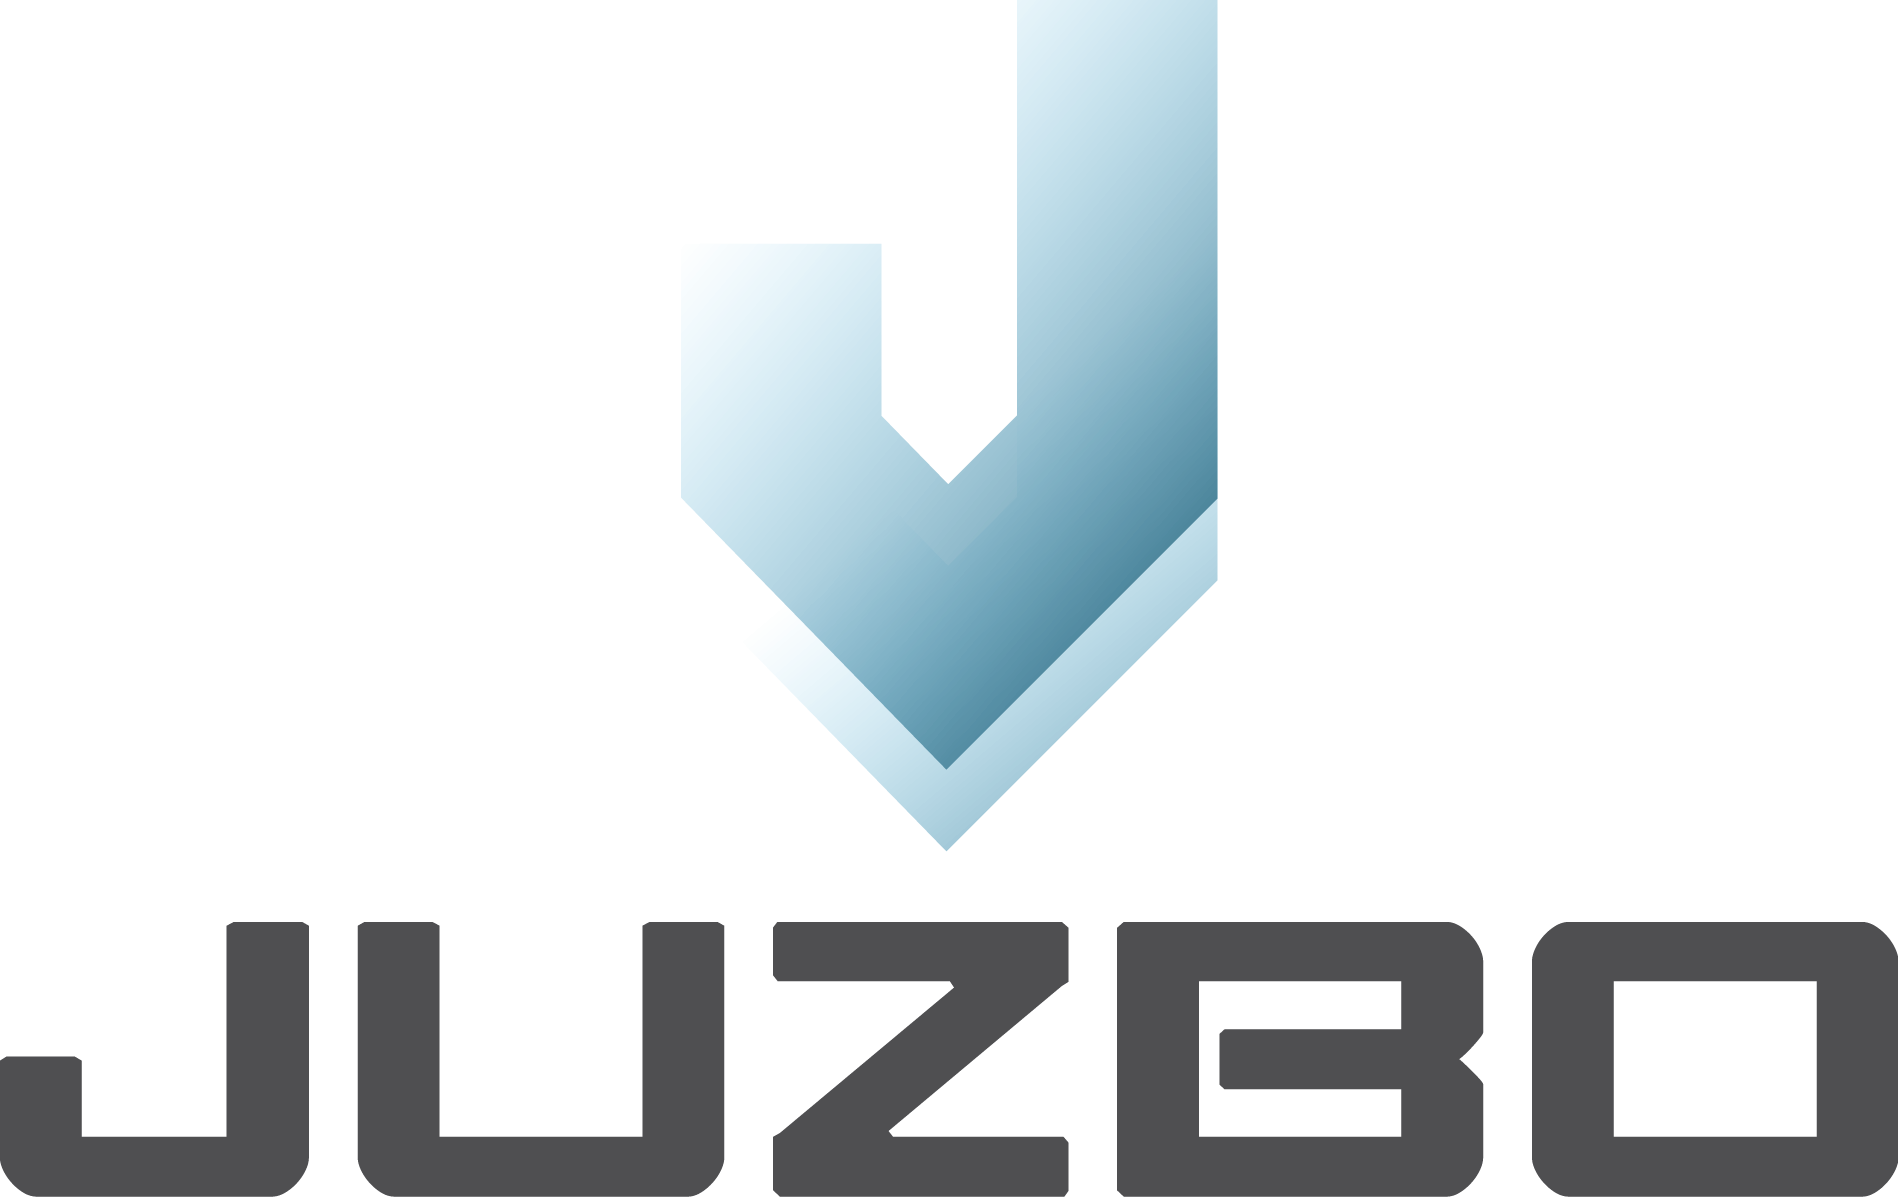 juzbo.com is for sale